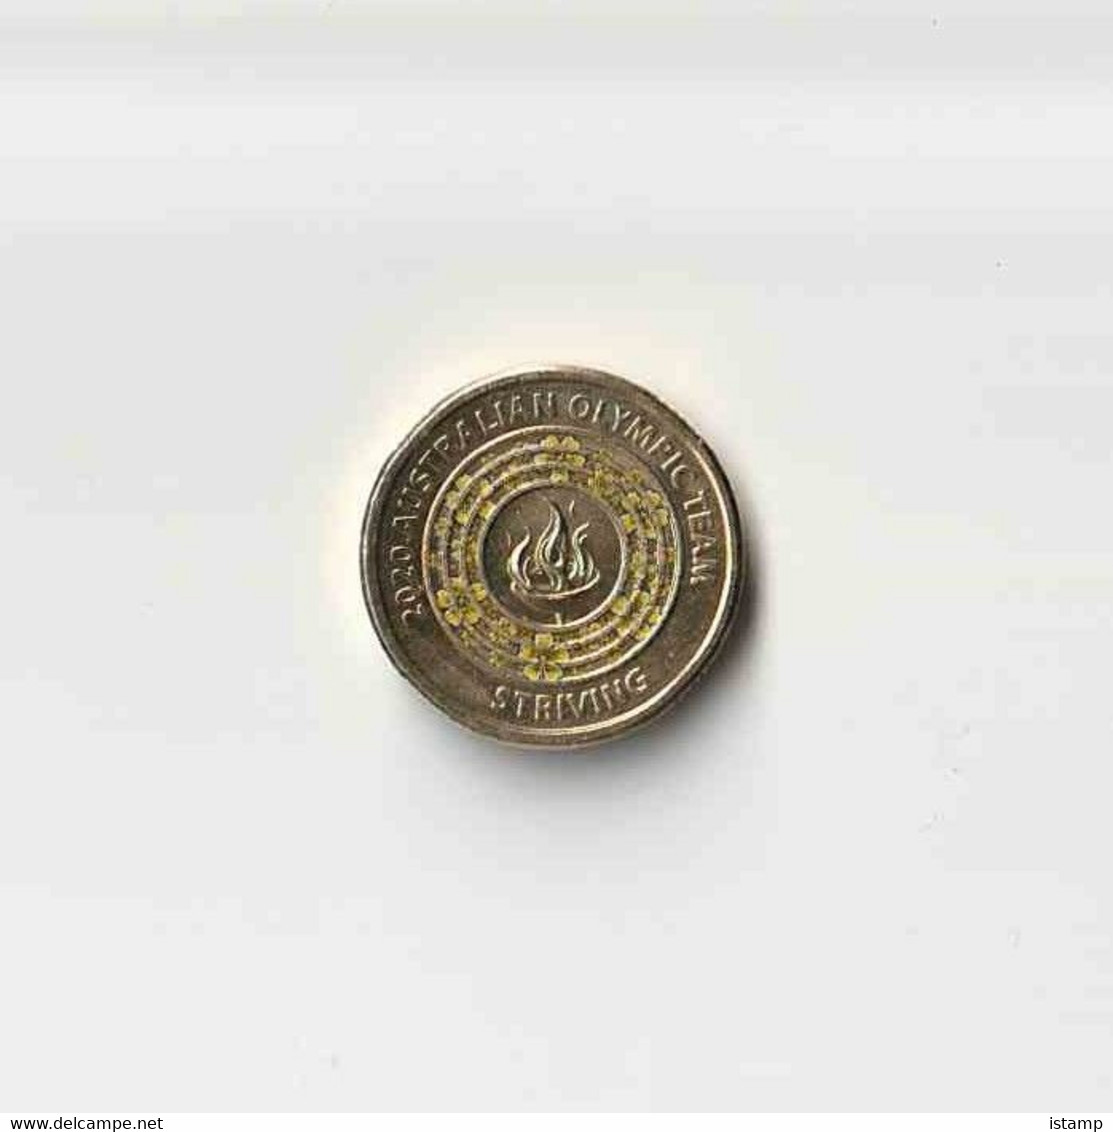 ⭐2020 - Australia Tokyo OLYMPIC GAMES 'Striving' - $2 Coin Circulated⭐ - 2 Dollars